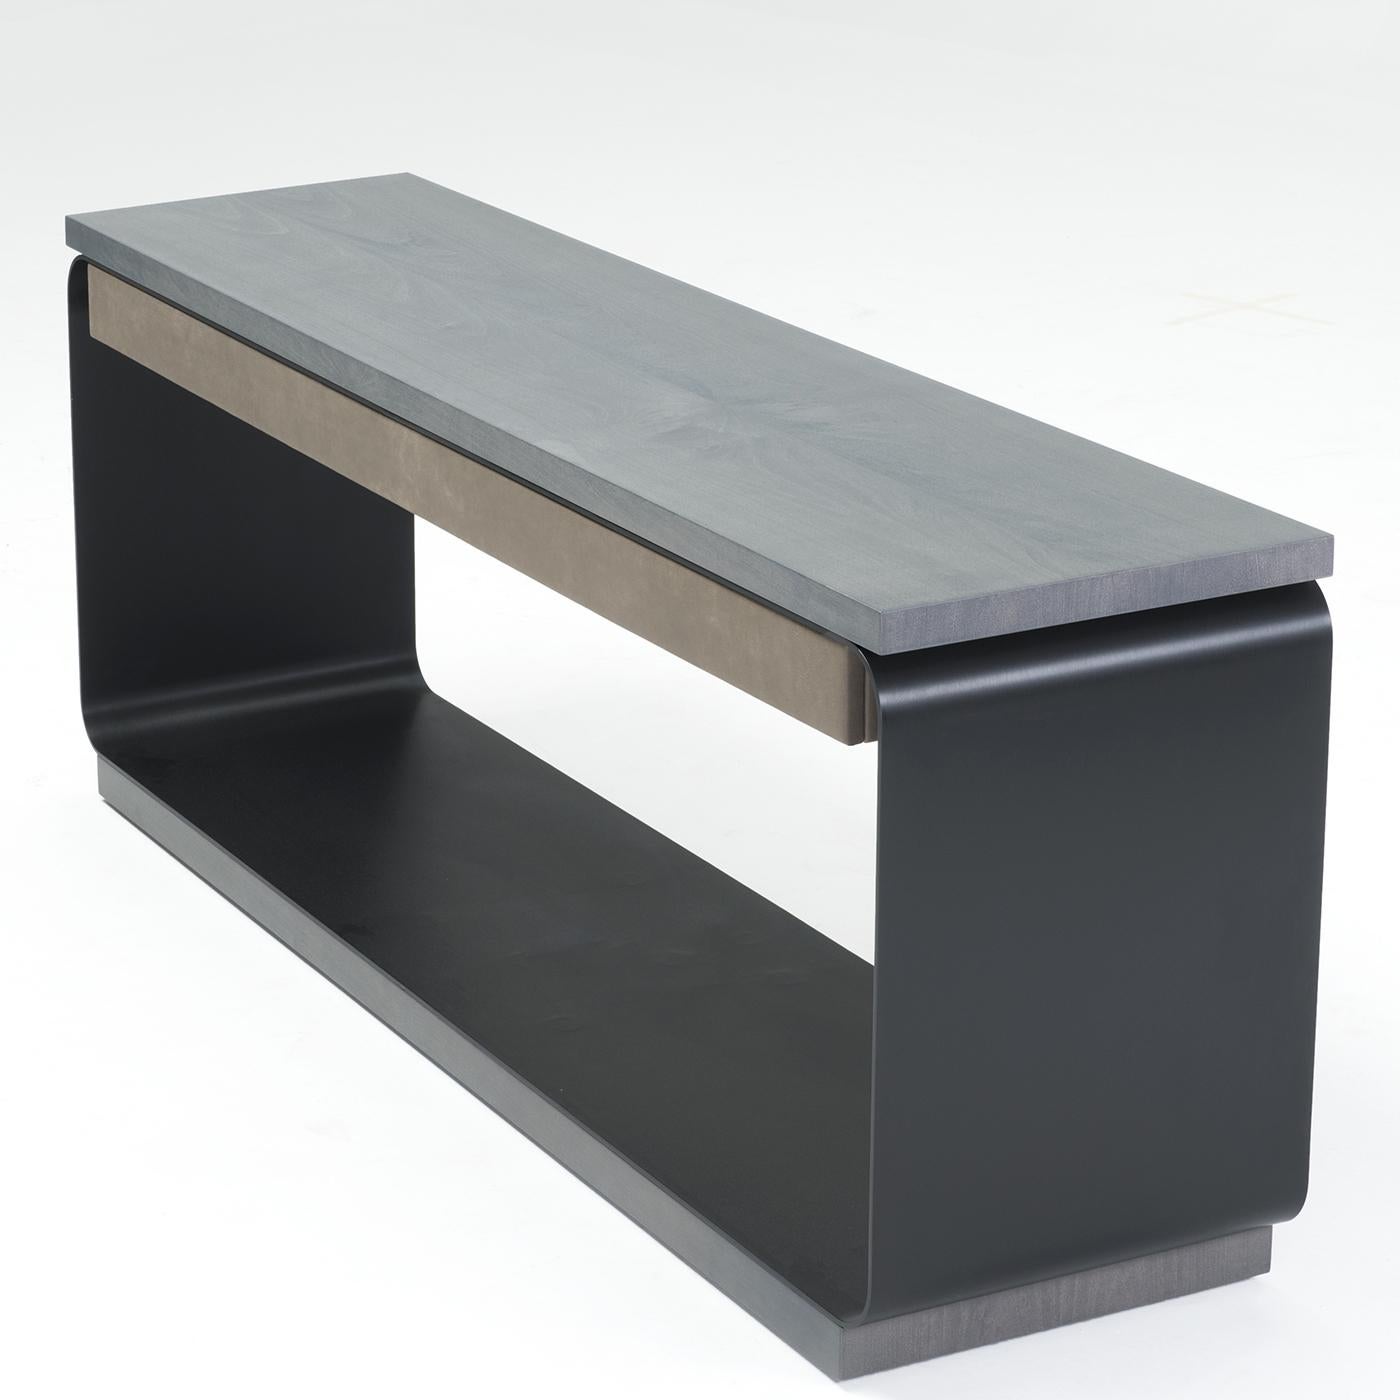 This minimalist console is composed of a satin anodized aluminum structure in burnt black, along with a charcoal maple wood base and three aligned drawers in genuine leather, for an interesting contrast in texture and touch. This sleek, elegant item